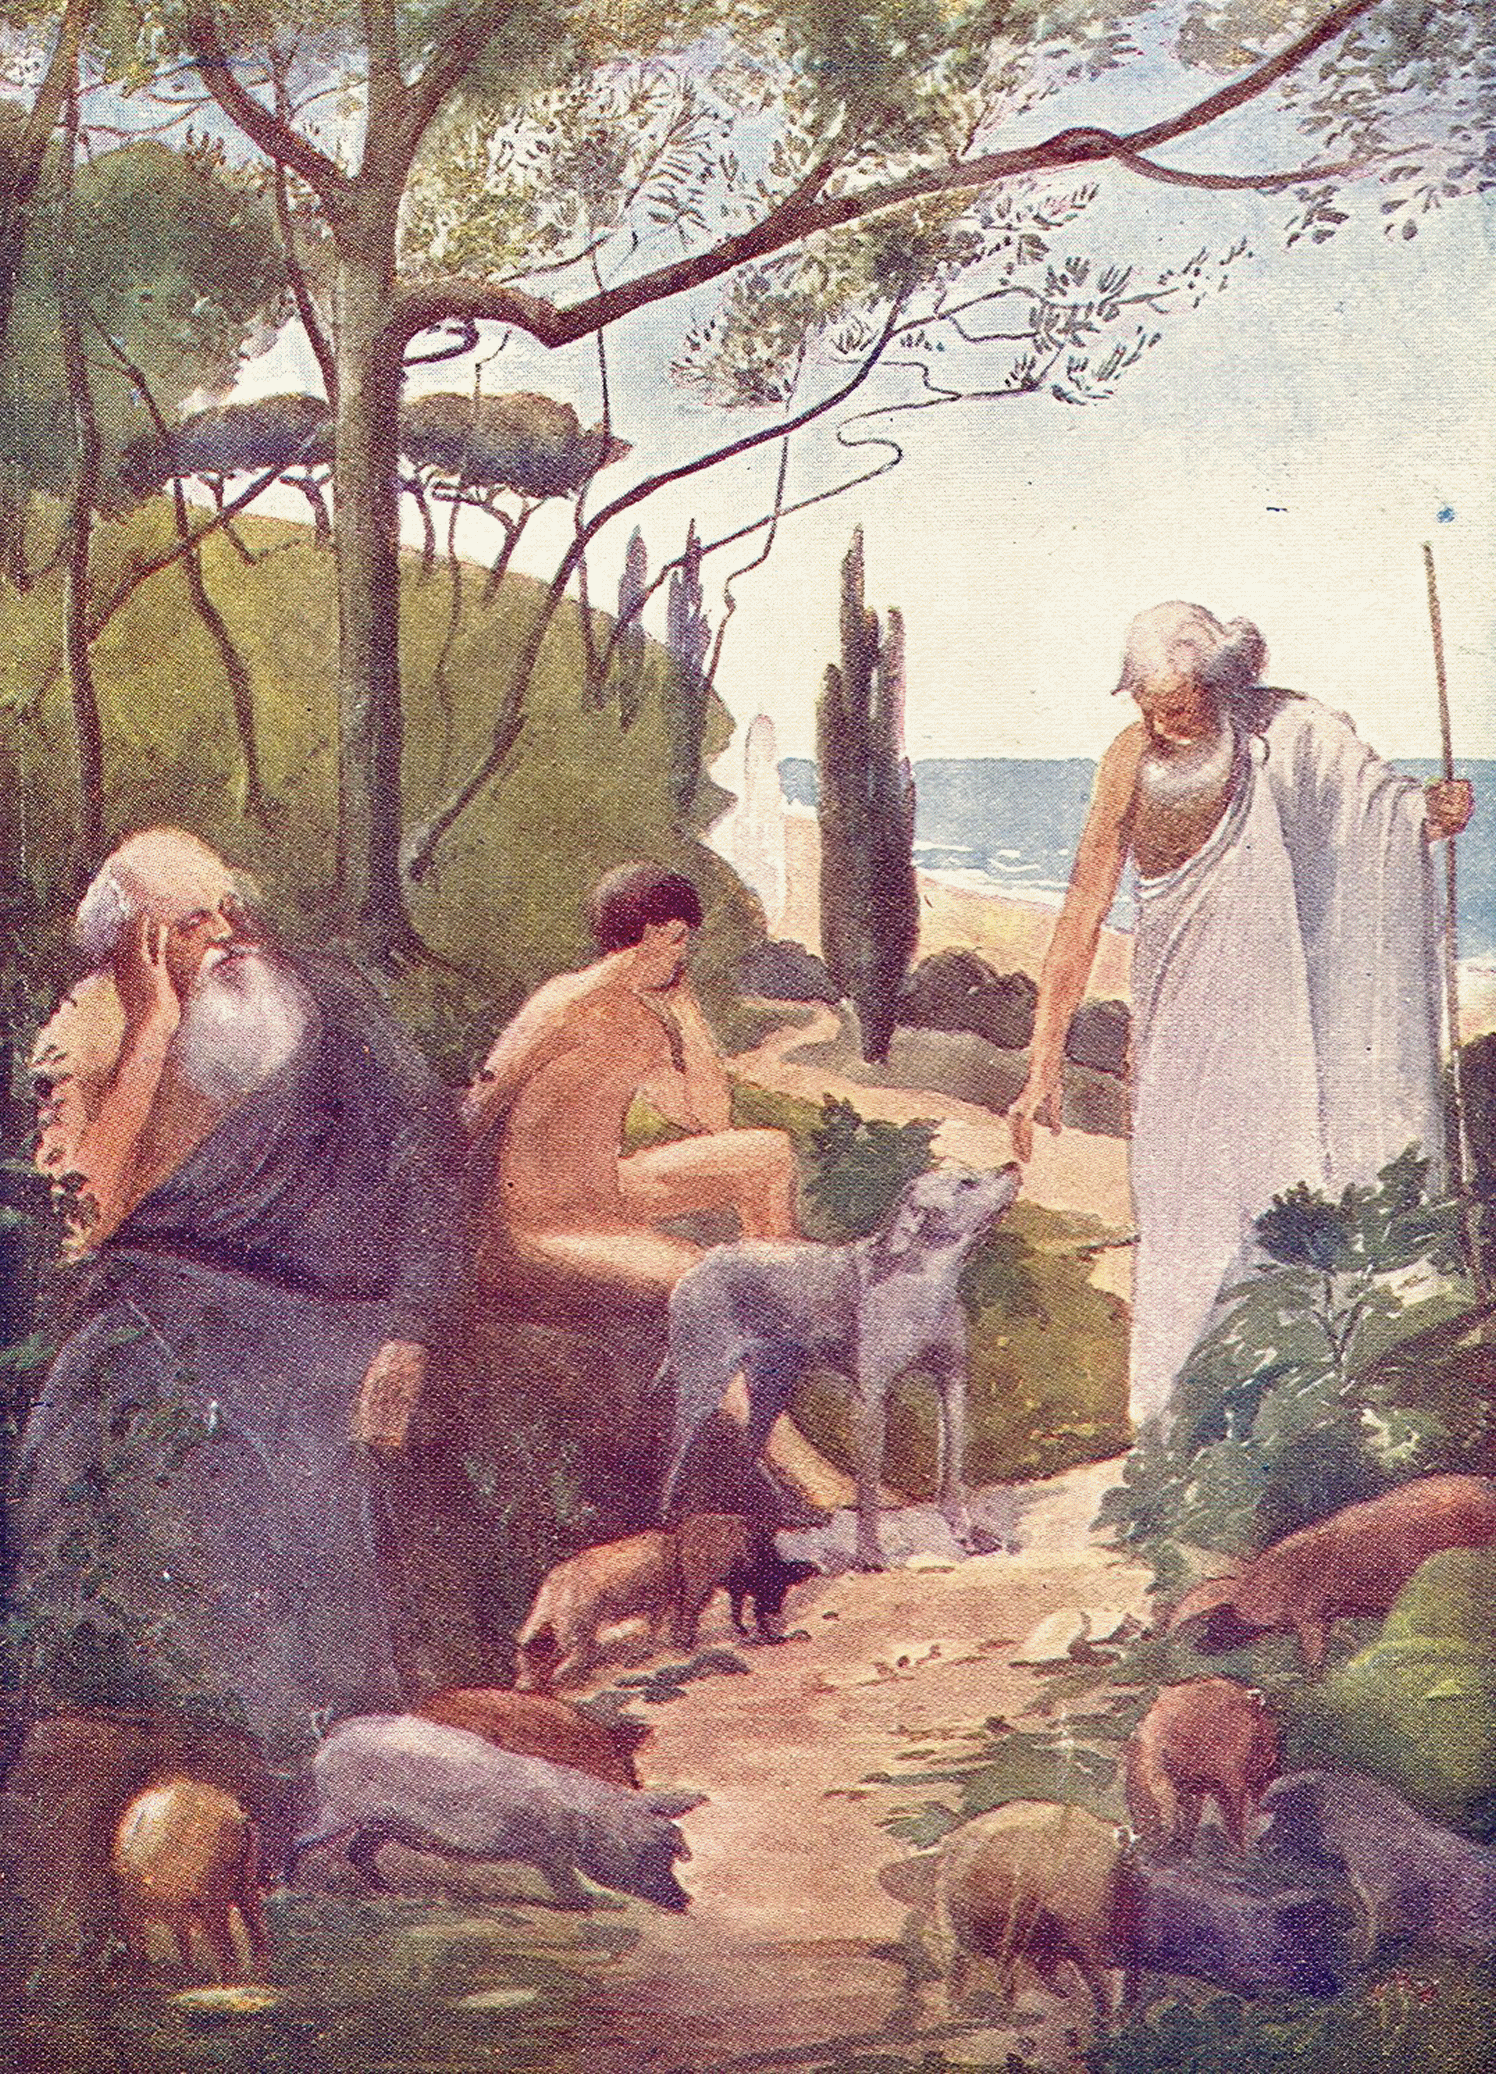 The return of Ulysses, illustration by E. M. Synge from the 1909 Story of the World children's book series (book 1: On the shores of Great Sea)